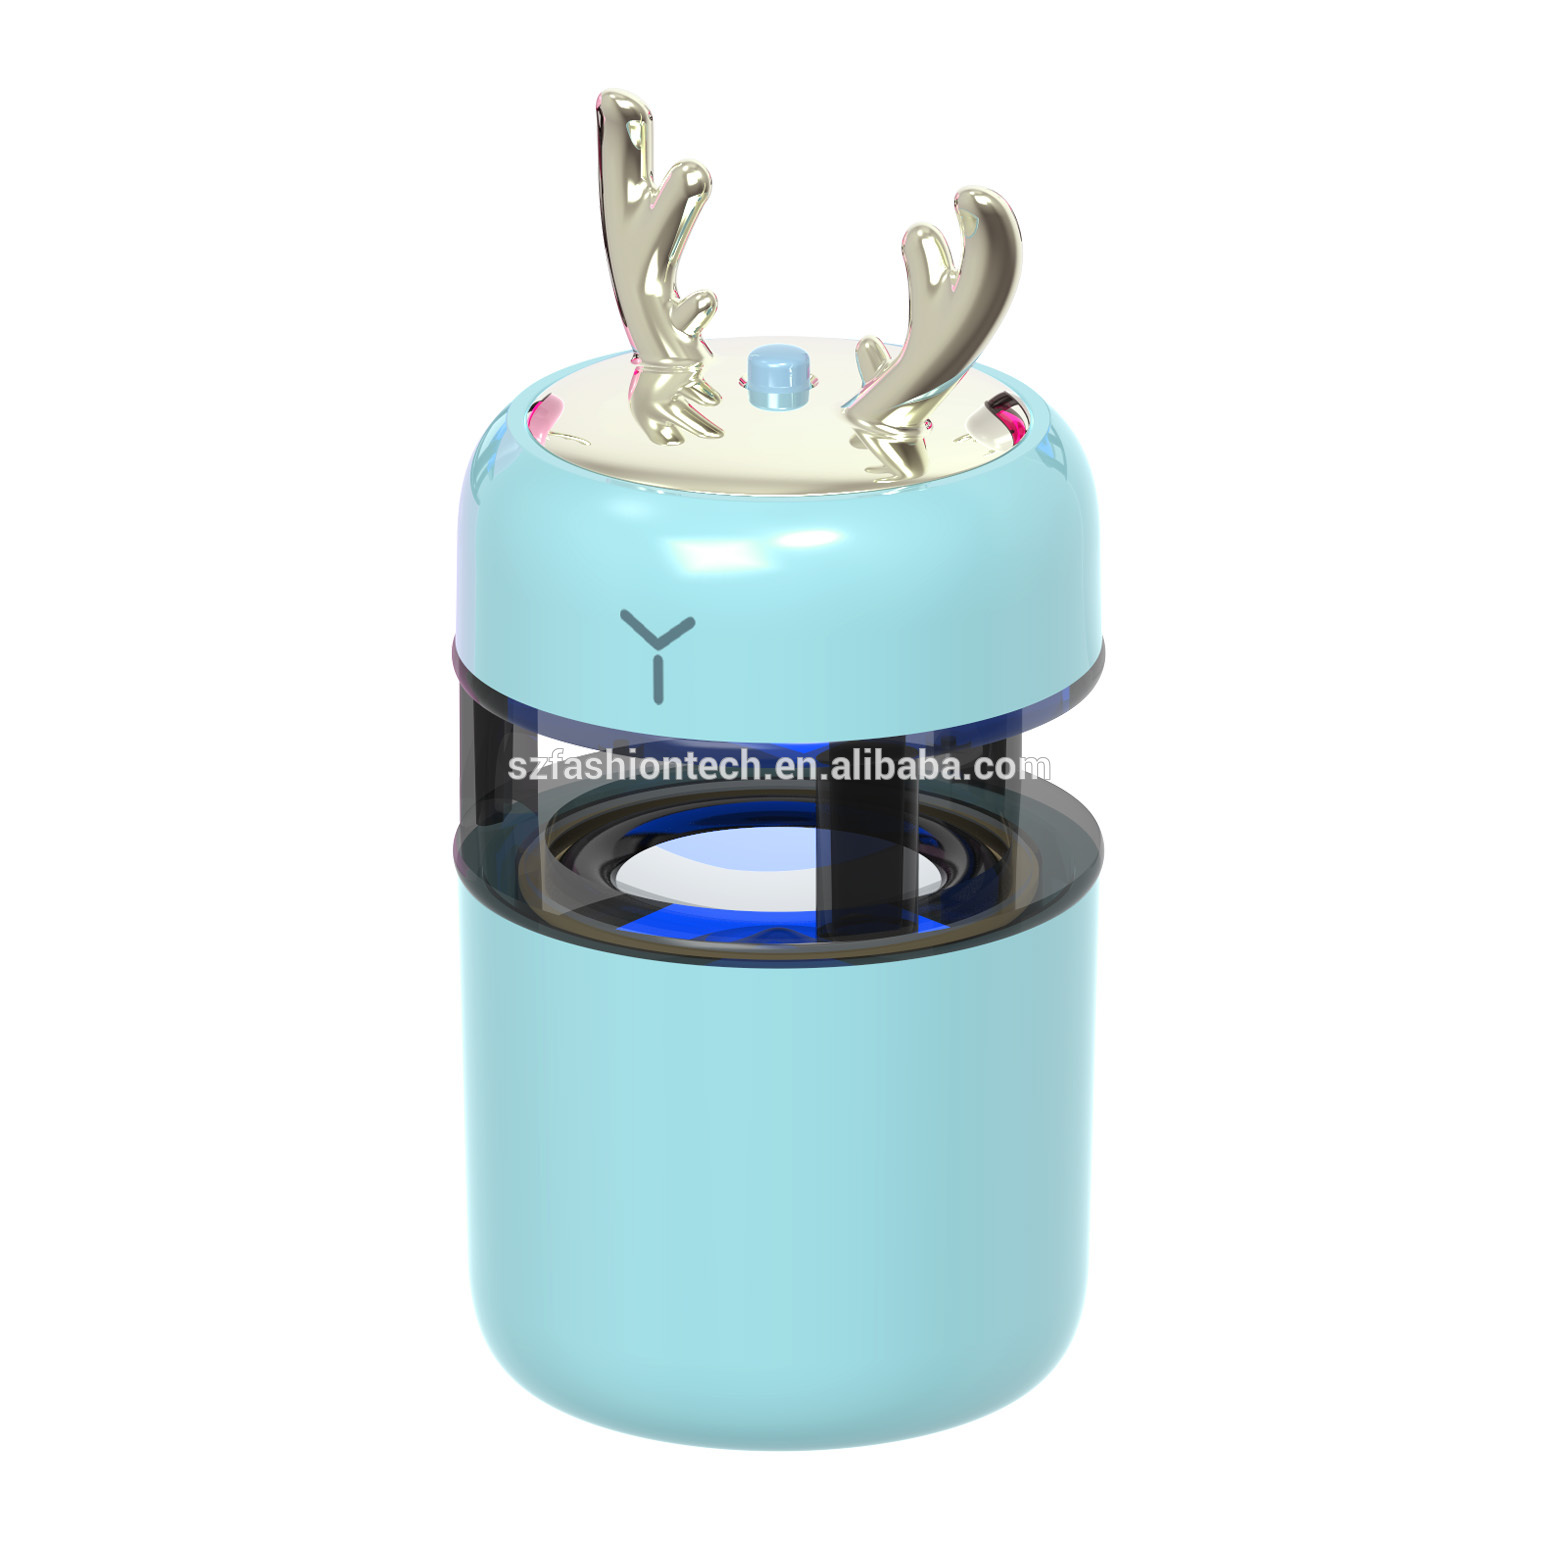 Promotional Gifts Toy Tank Bluetooth Speaker Music Player with LED light